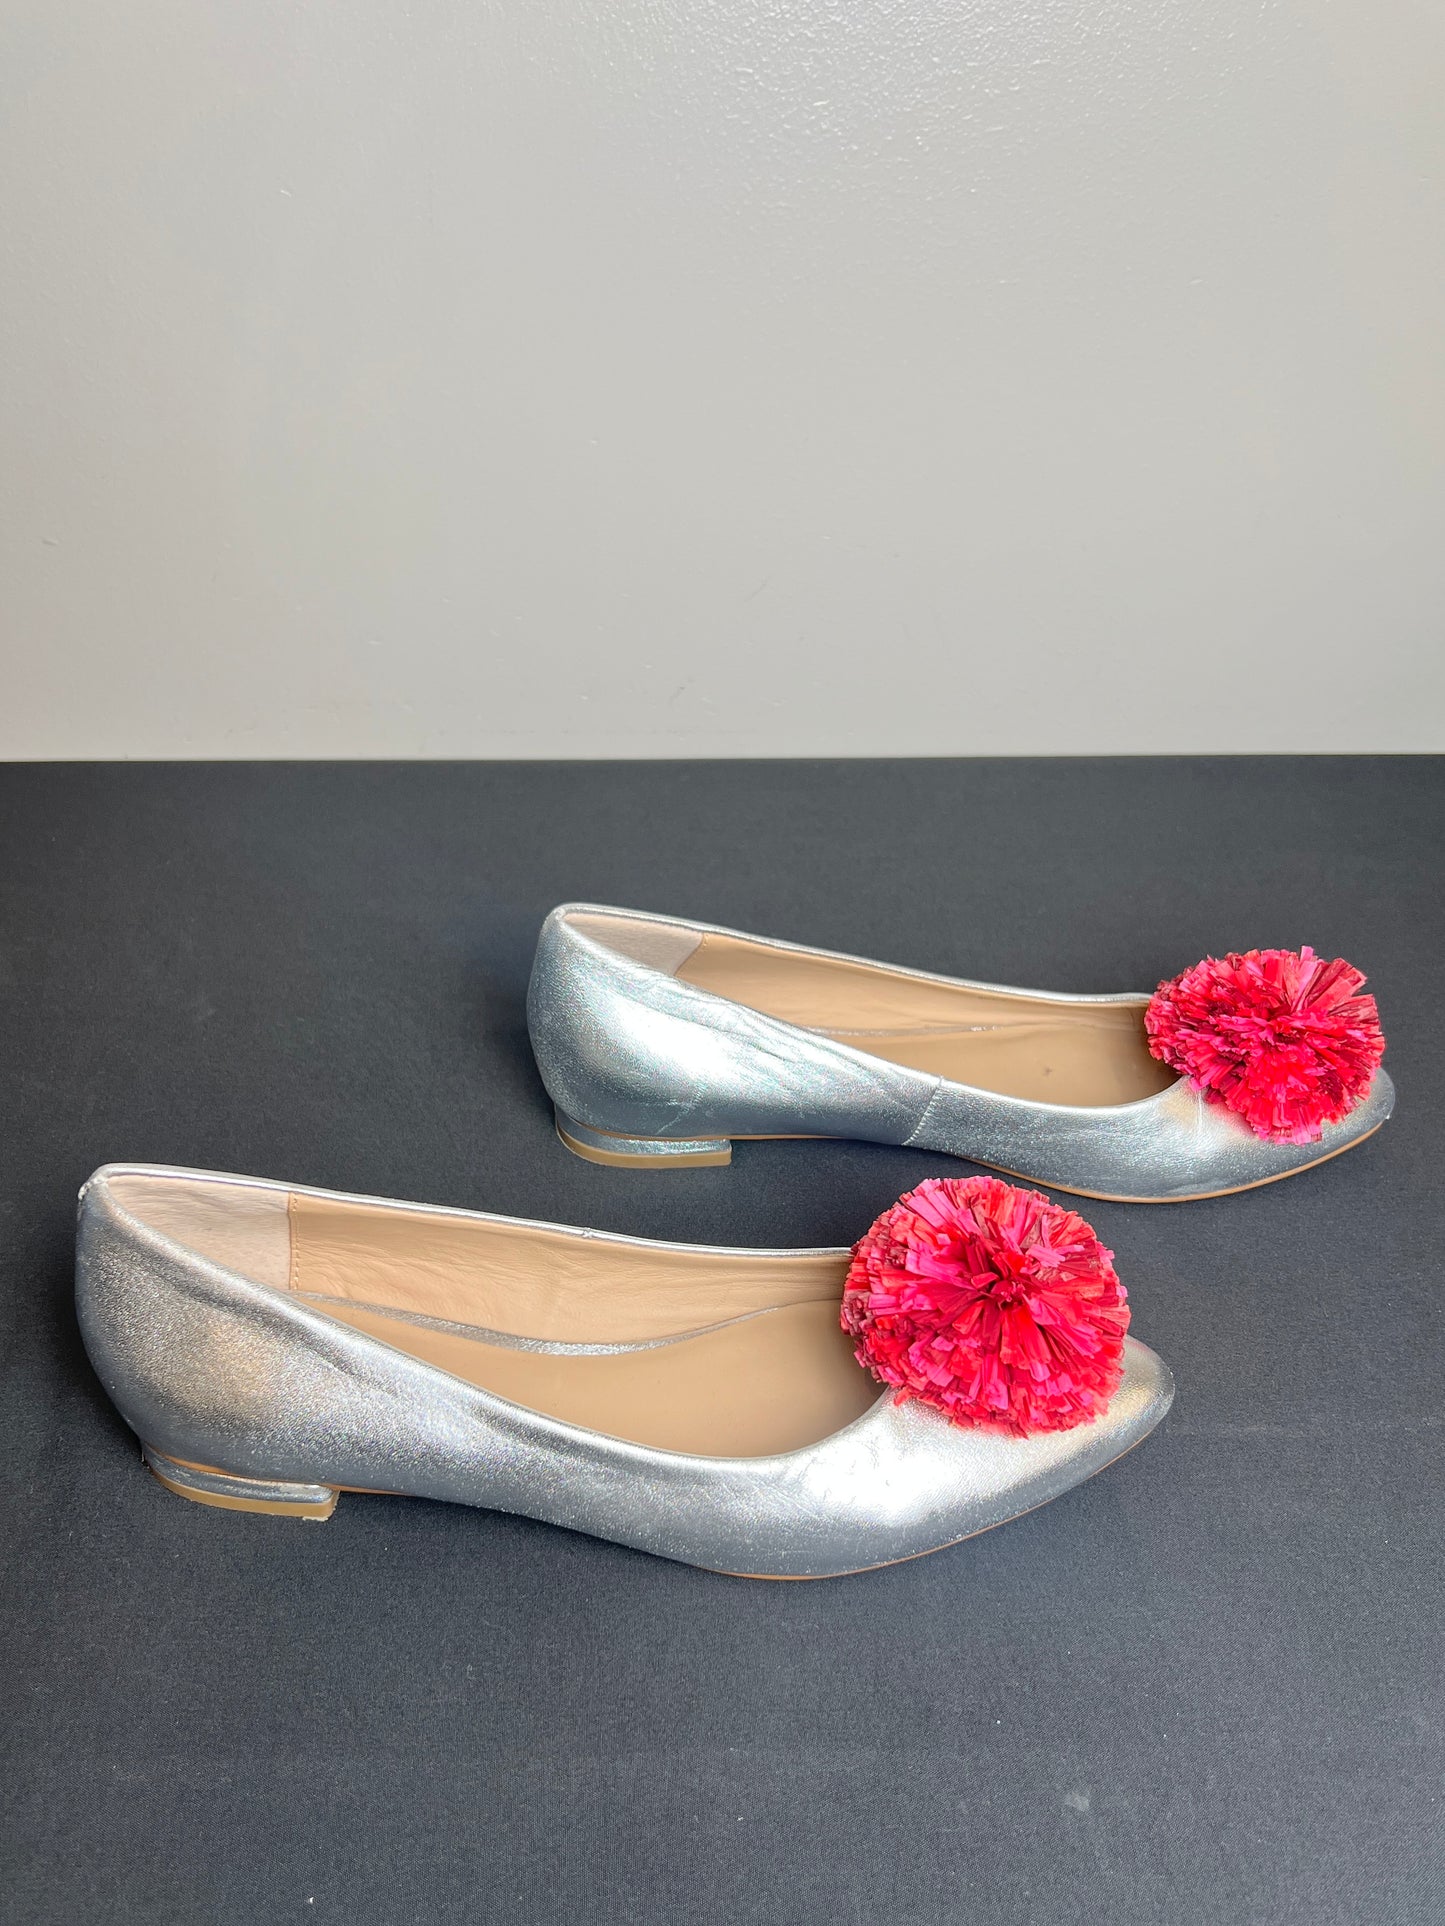 Shoes Flats Ballet By Anthropologie  Size: 8